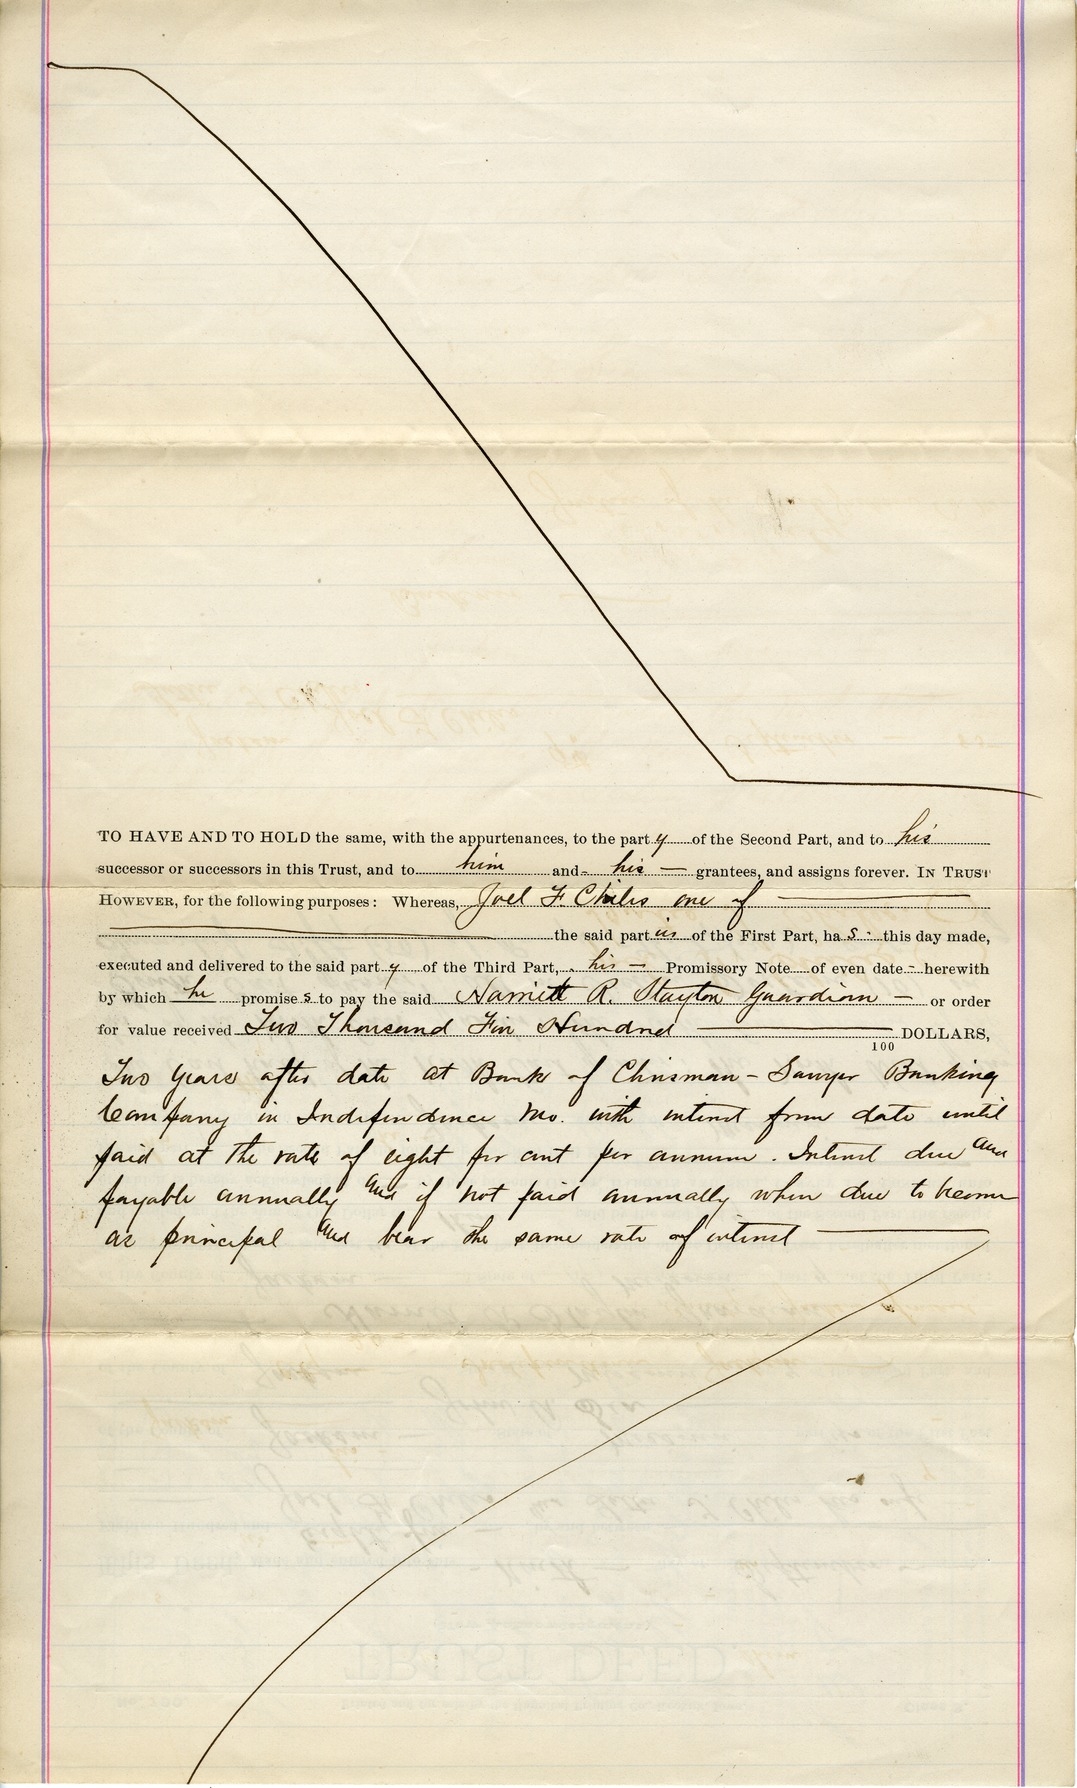 Trust Deed from Joel F. Chiles and Lutie T. Chiles to John A. Sea and Hamit R. Stayton